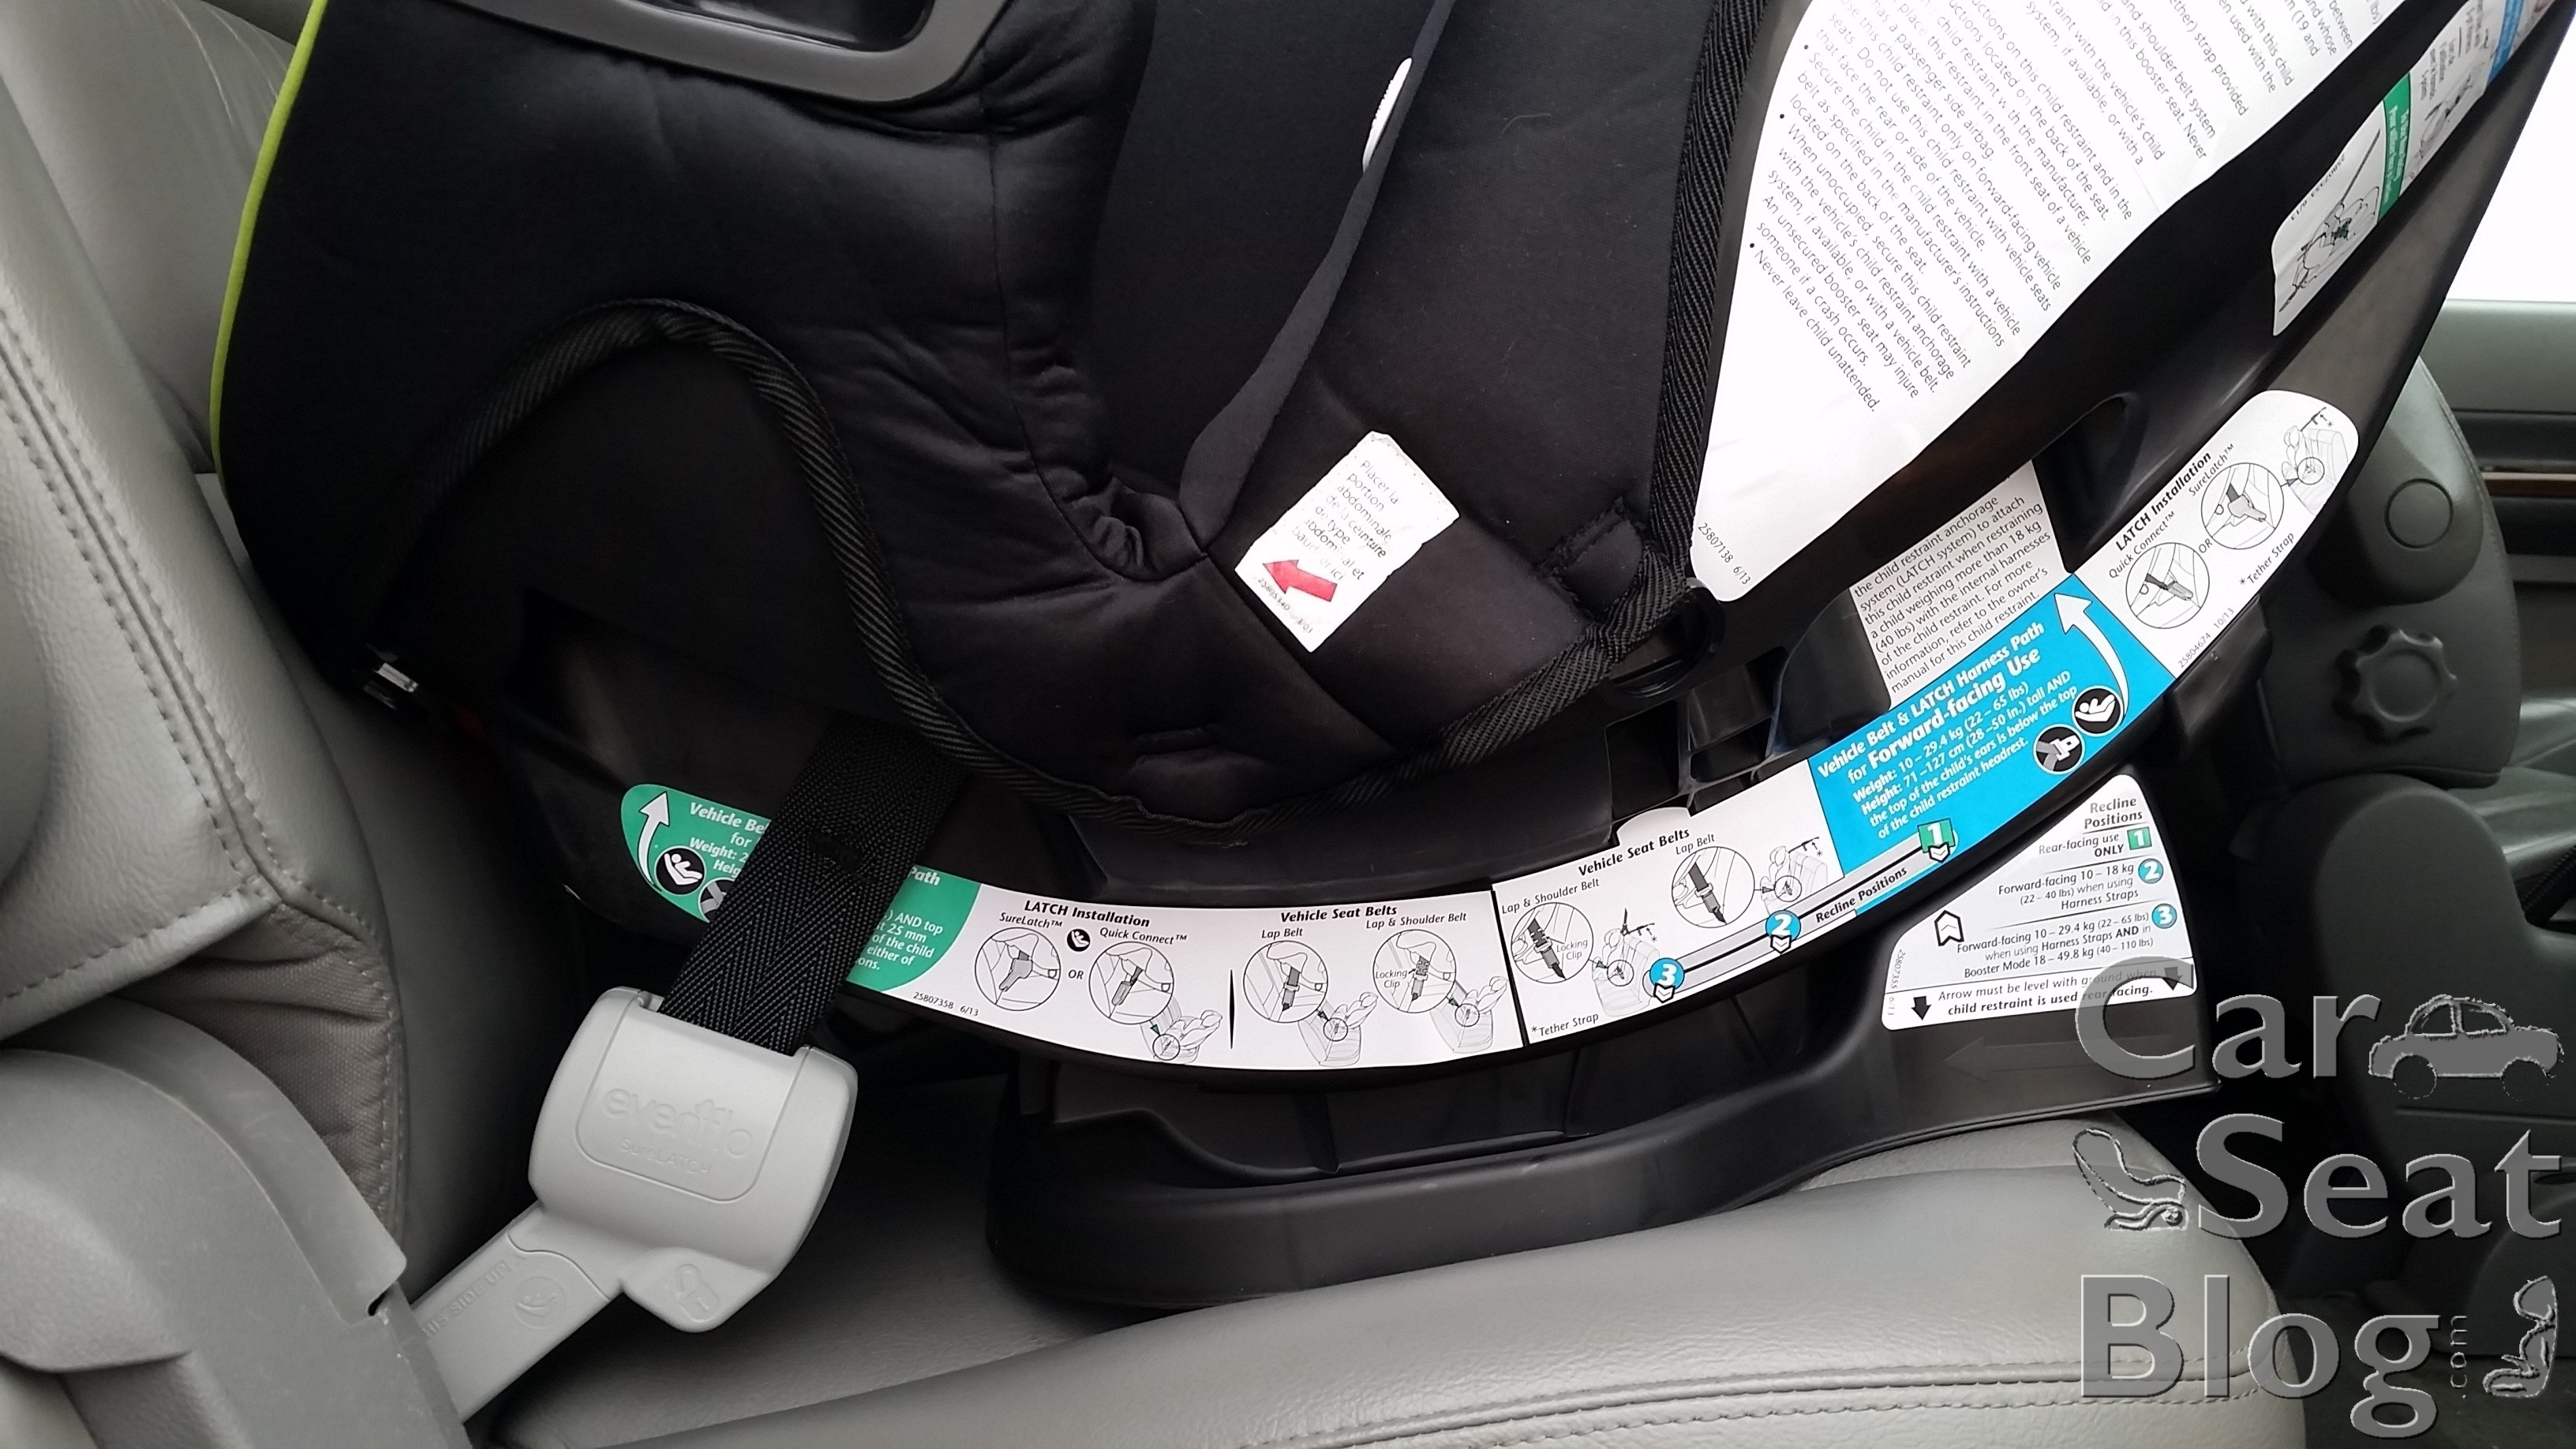 Cosco Car Seat Strap Diagram Carseatblog the Most Trusted source for Car Seat Reviews Ratings Of Cosco Car Seat Strap Diagram